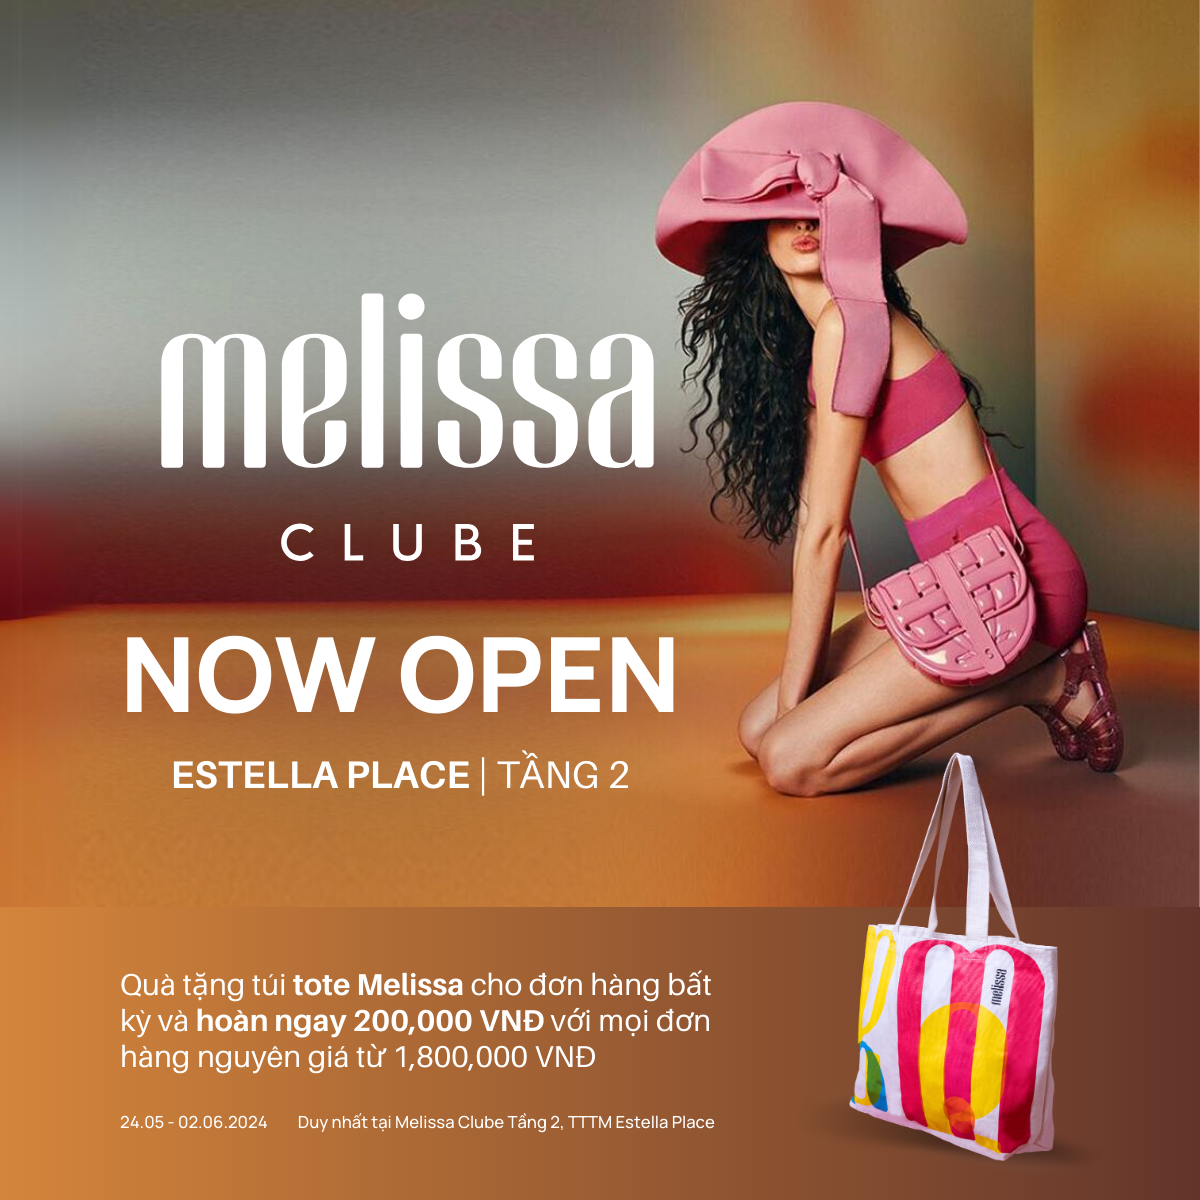 📣THE SUSTAINABLE SHOE BRAND MELISSA IS NOW OFFICIALLY OPEN IN ESTELLA PLACE 💖👠